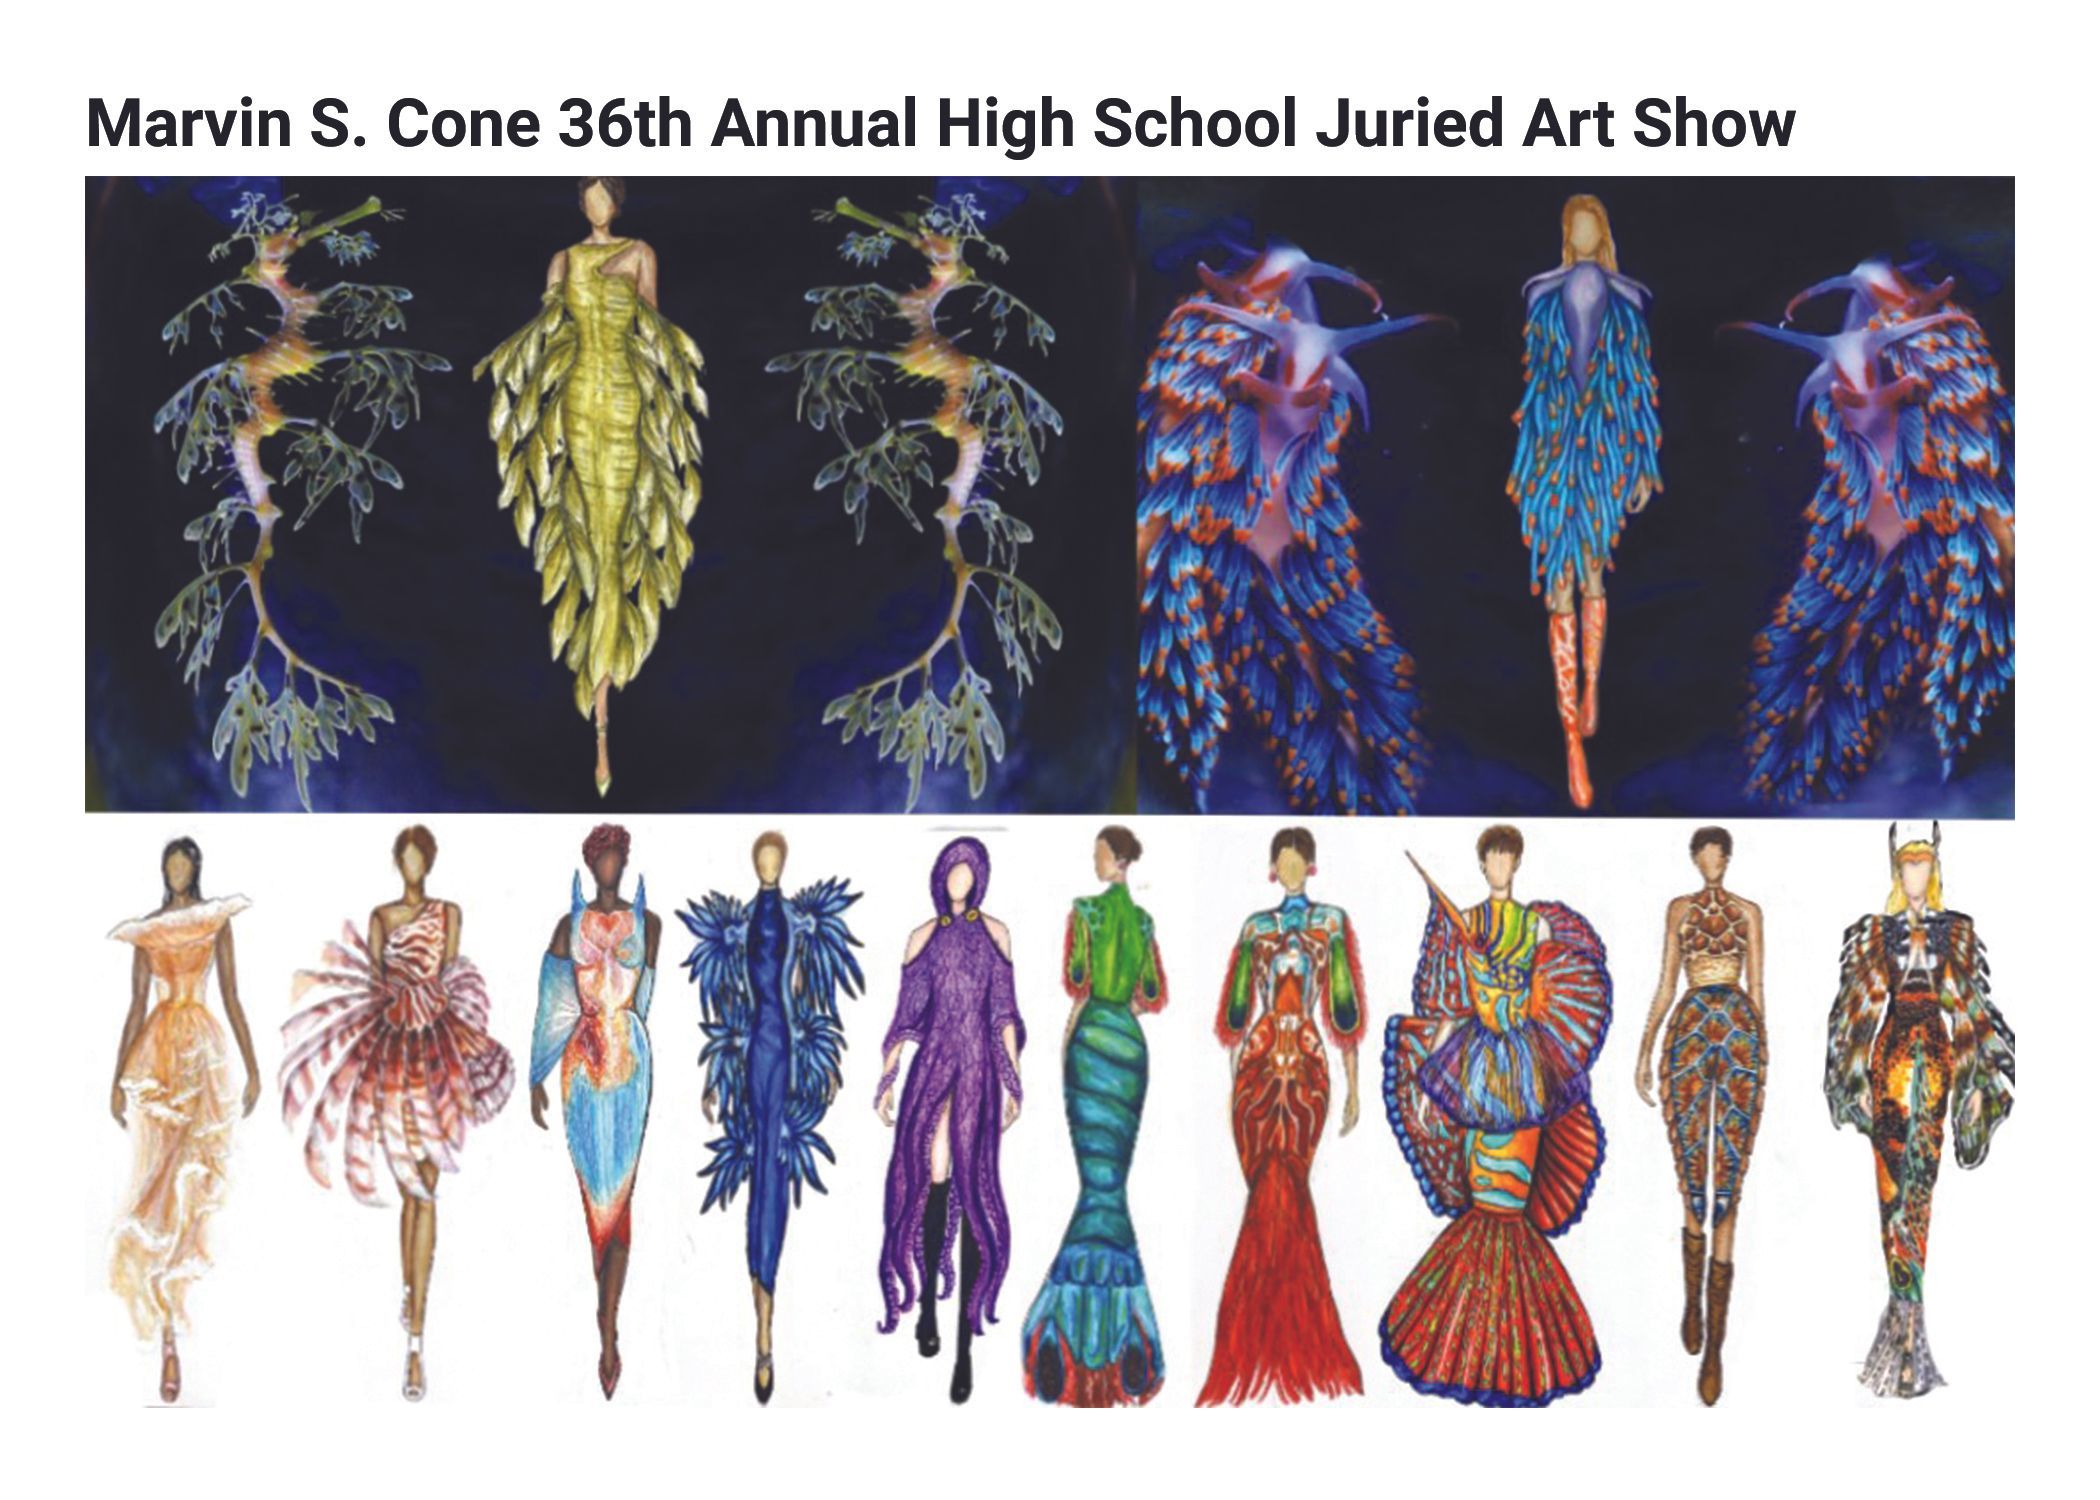 Marvin S. Cone 36th Annual High School Juried Art Show